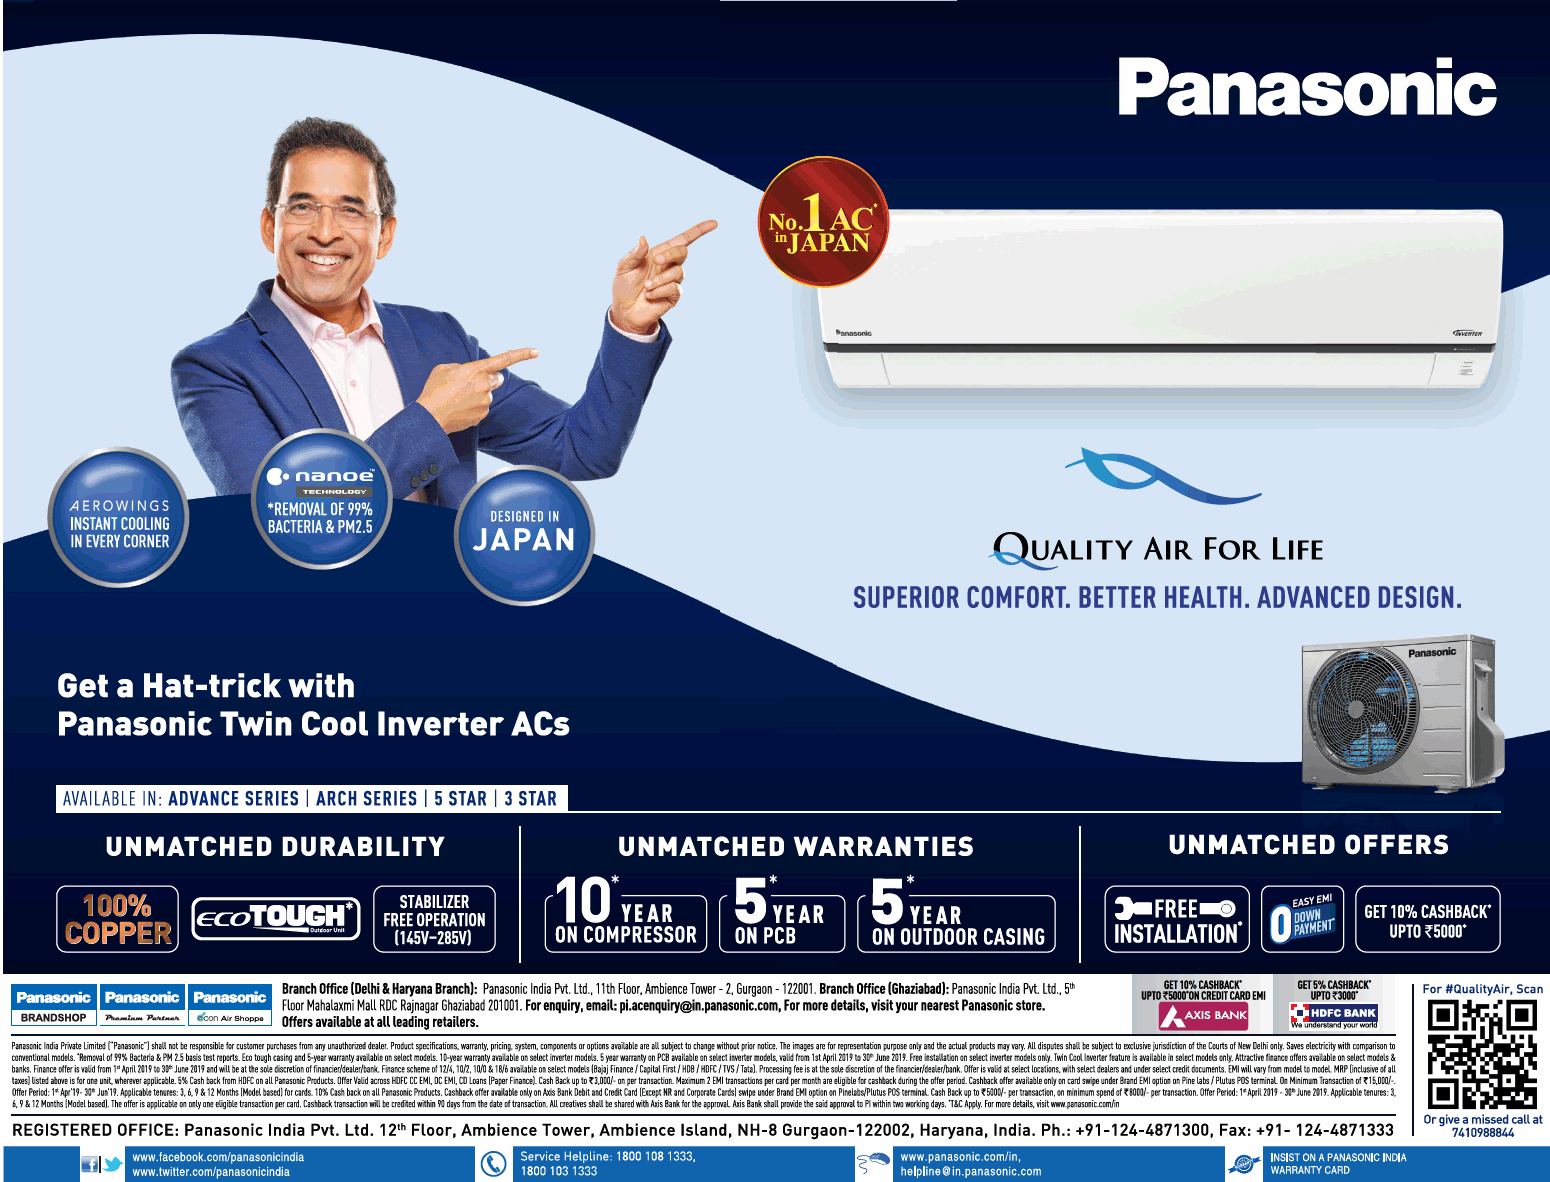 panasonic-air-conditioners-quality-air-for-life-ad-delhi-times-20-04-2019.png